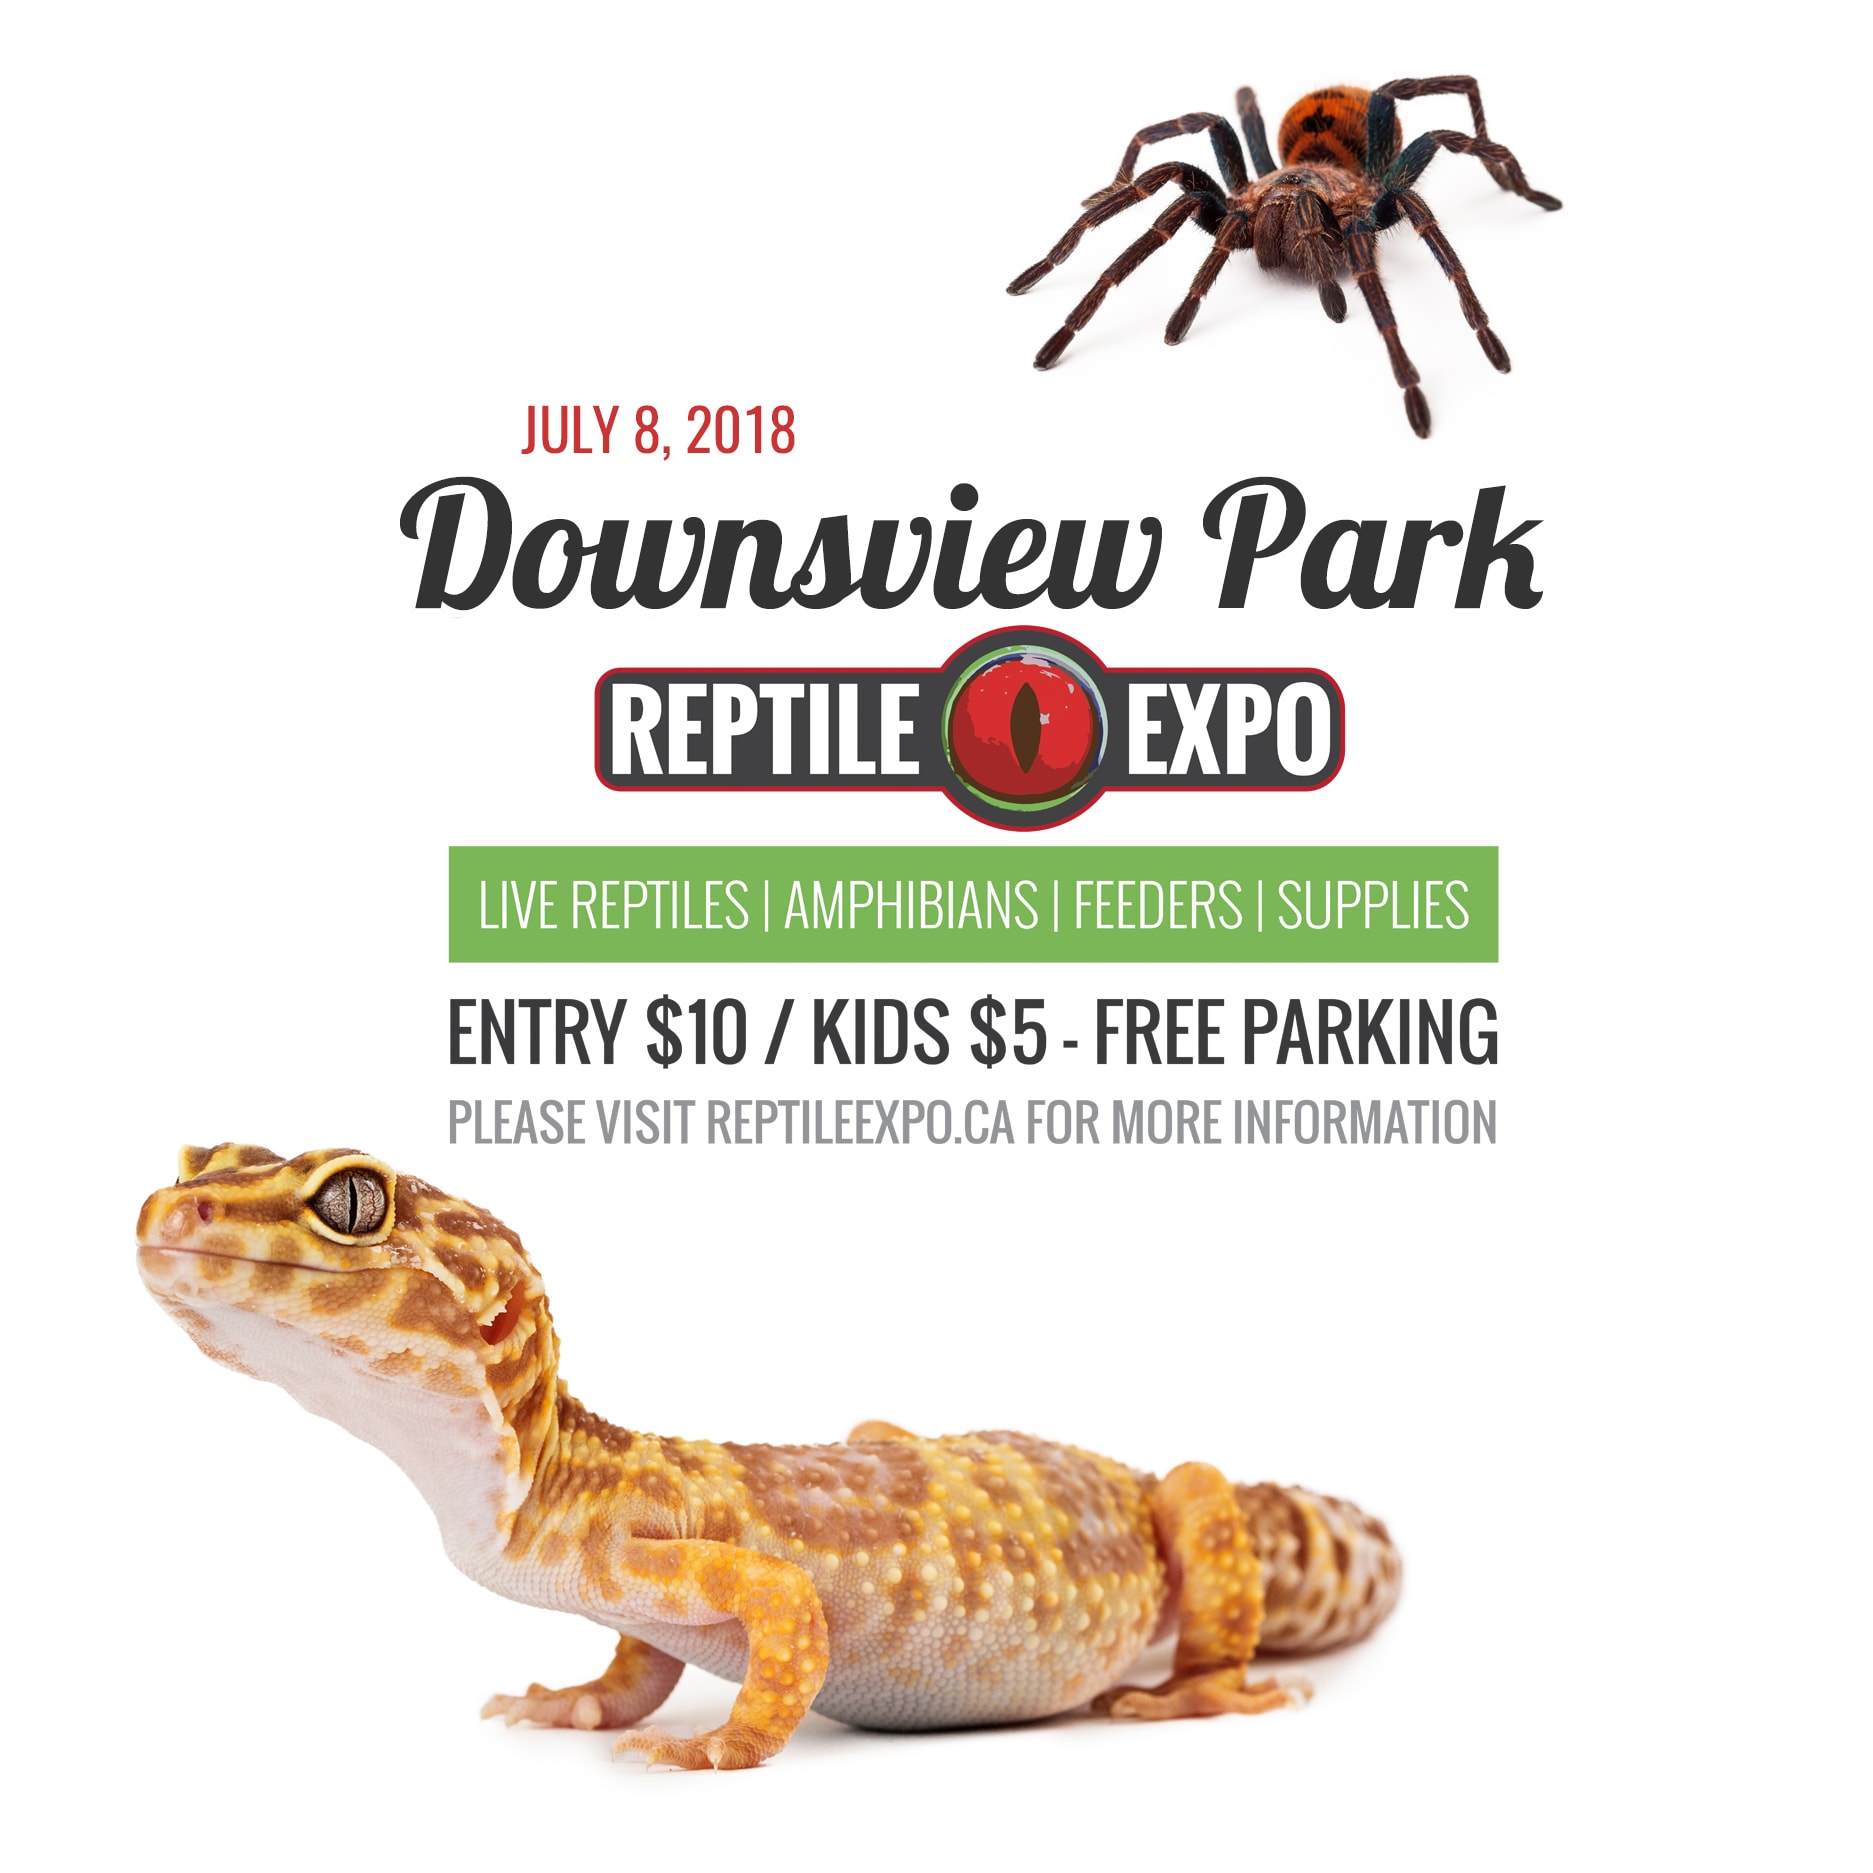 Downsview Park Reptile Expo Help! We've Got Kids